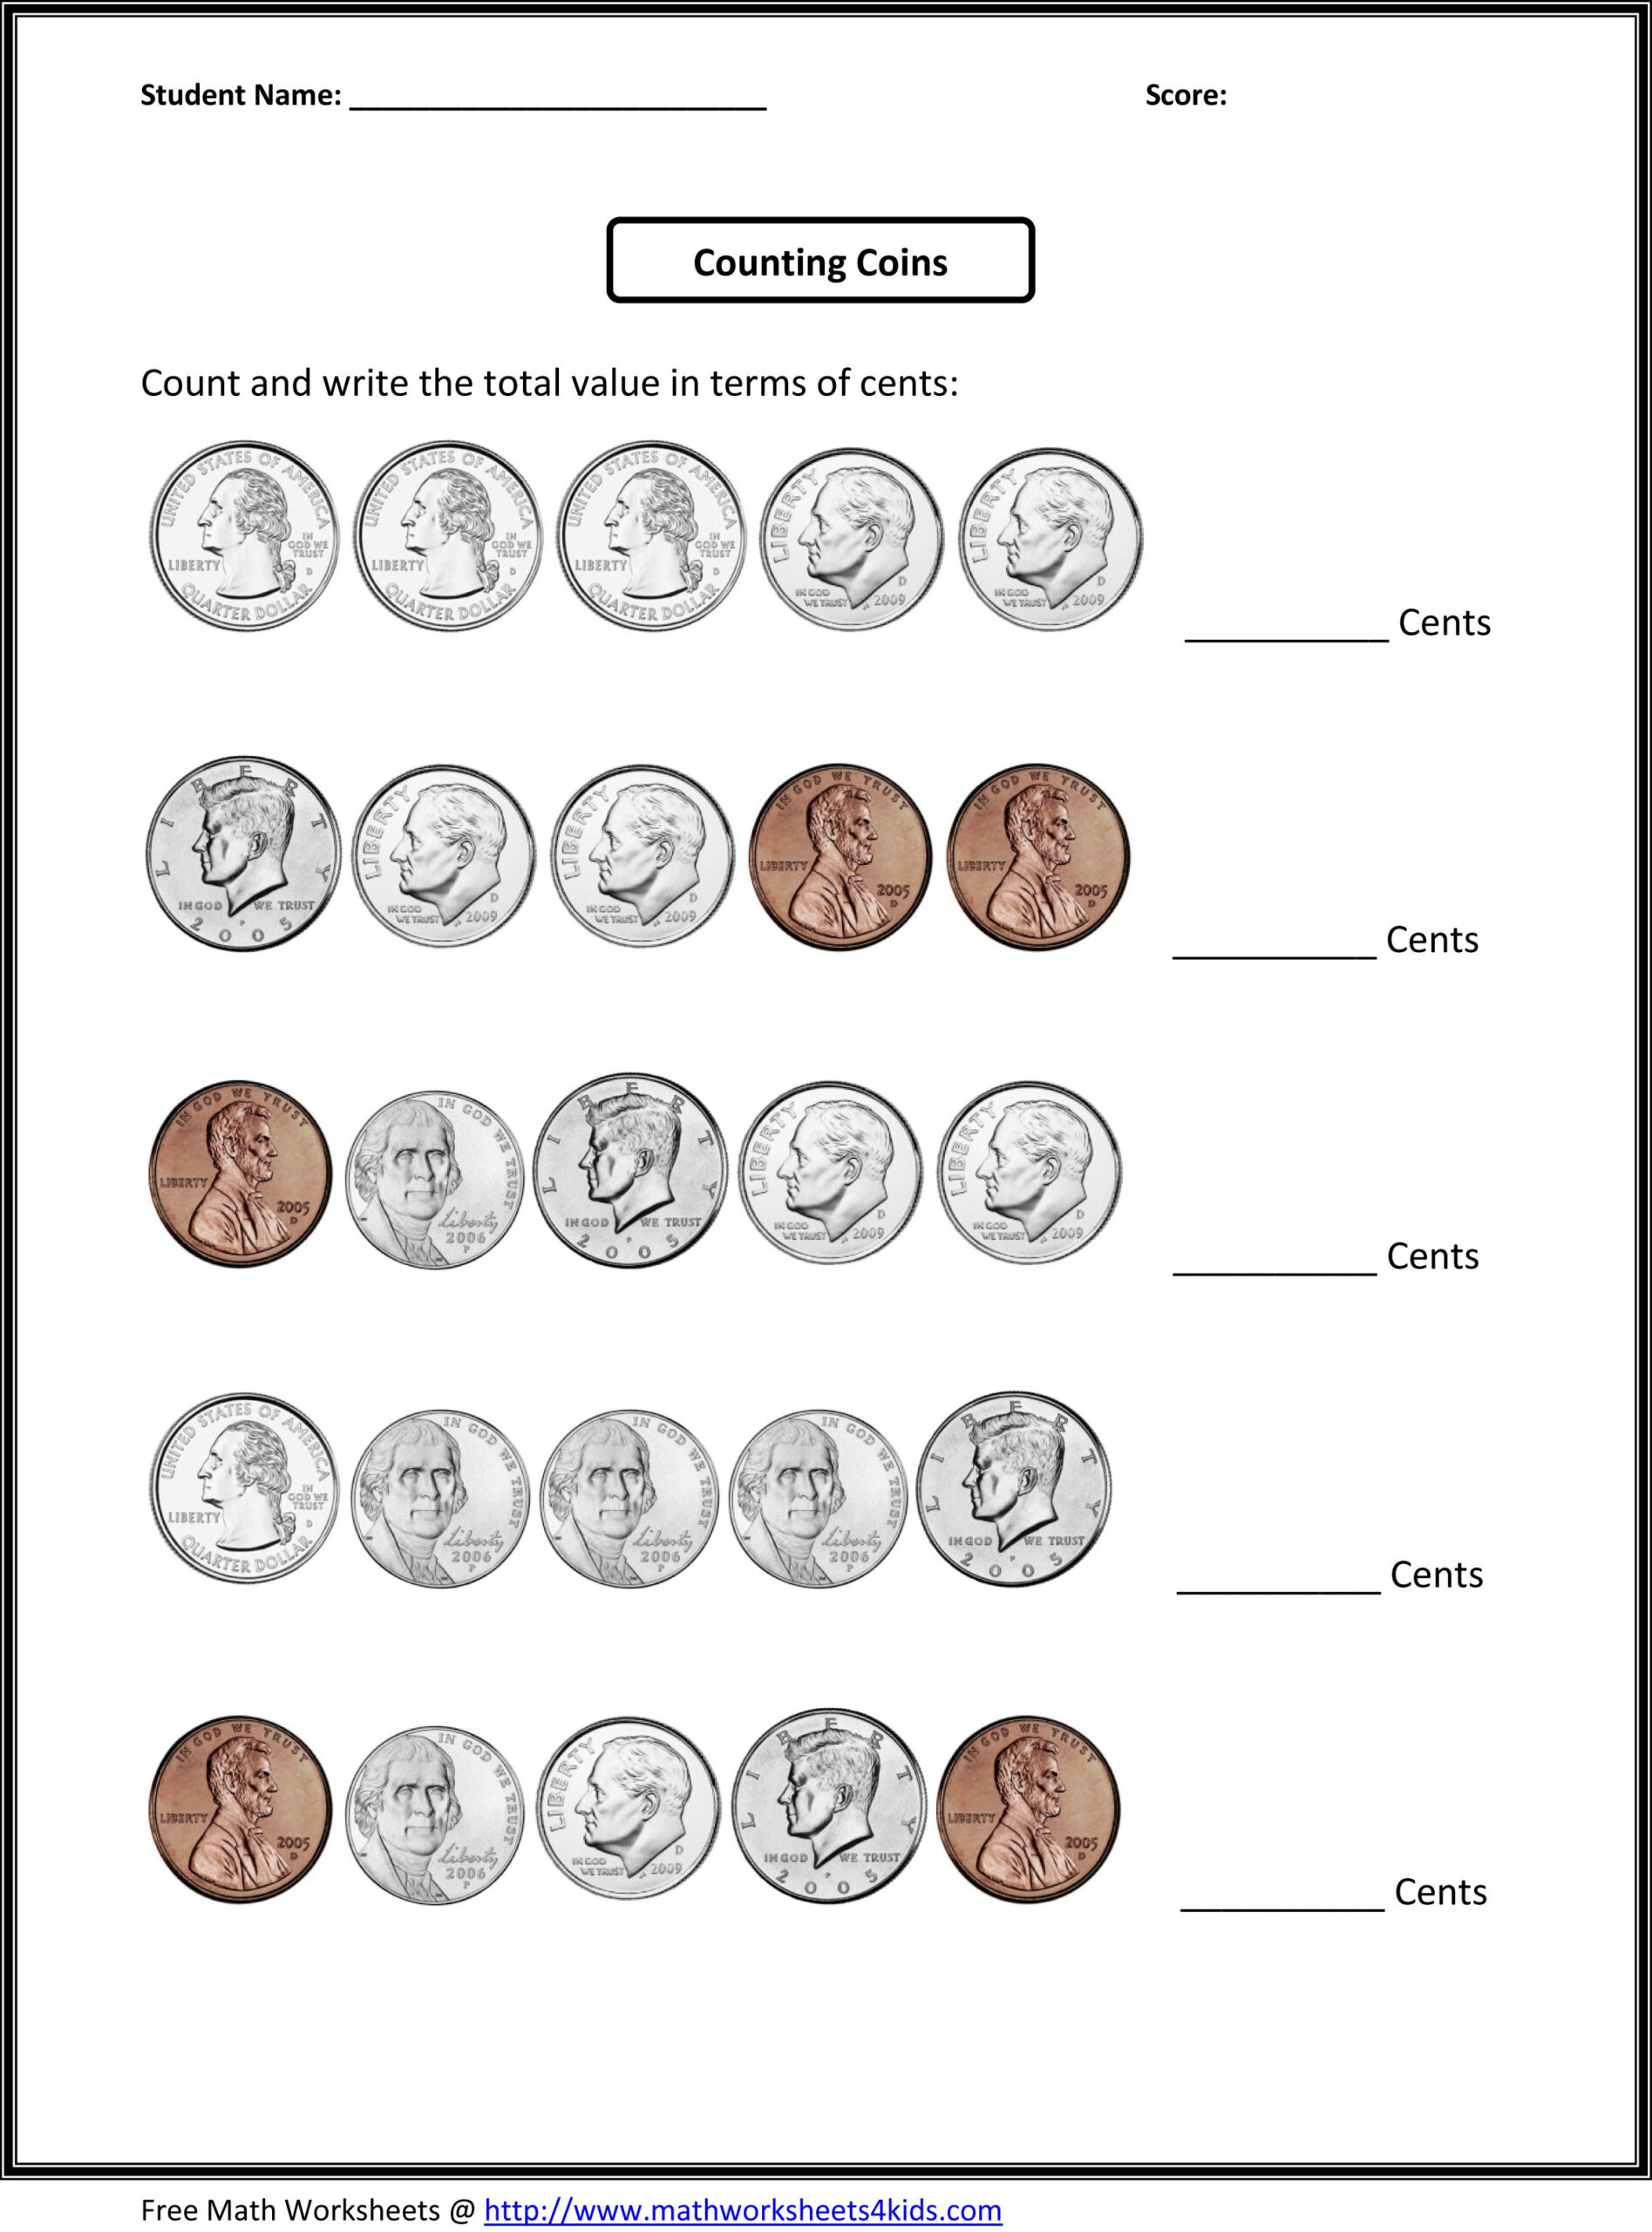 Counting Coins Worksheet For Kids for Free Printable Fun Math Worksheets For 4Th Grade